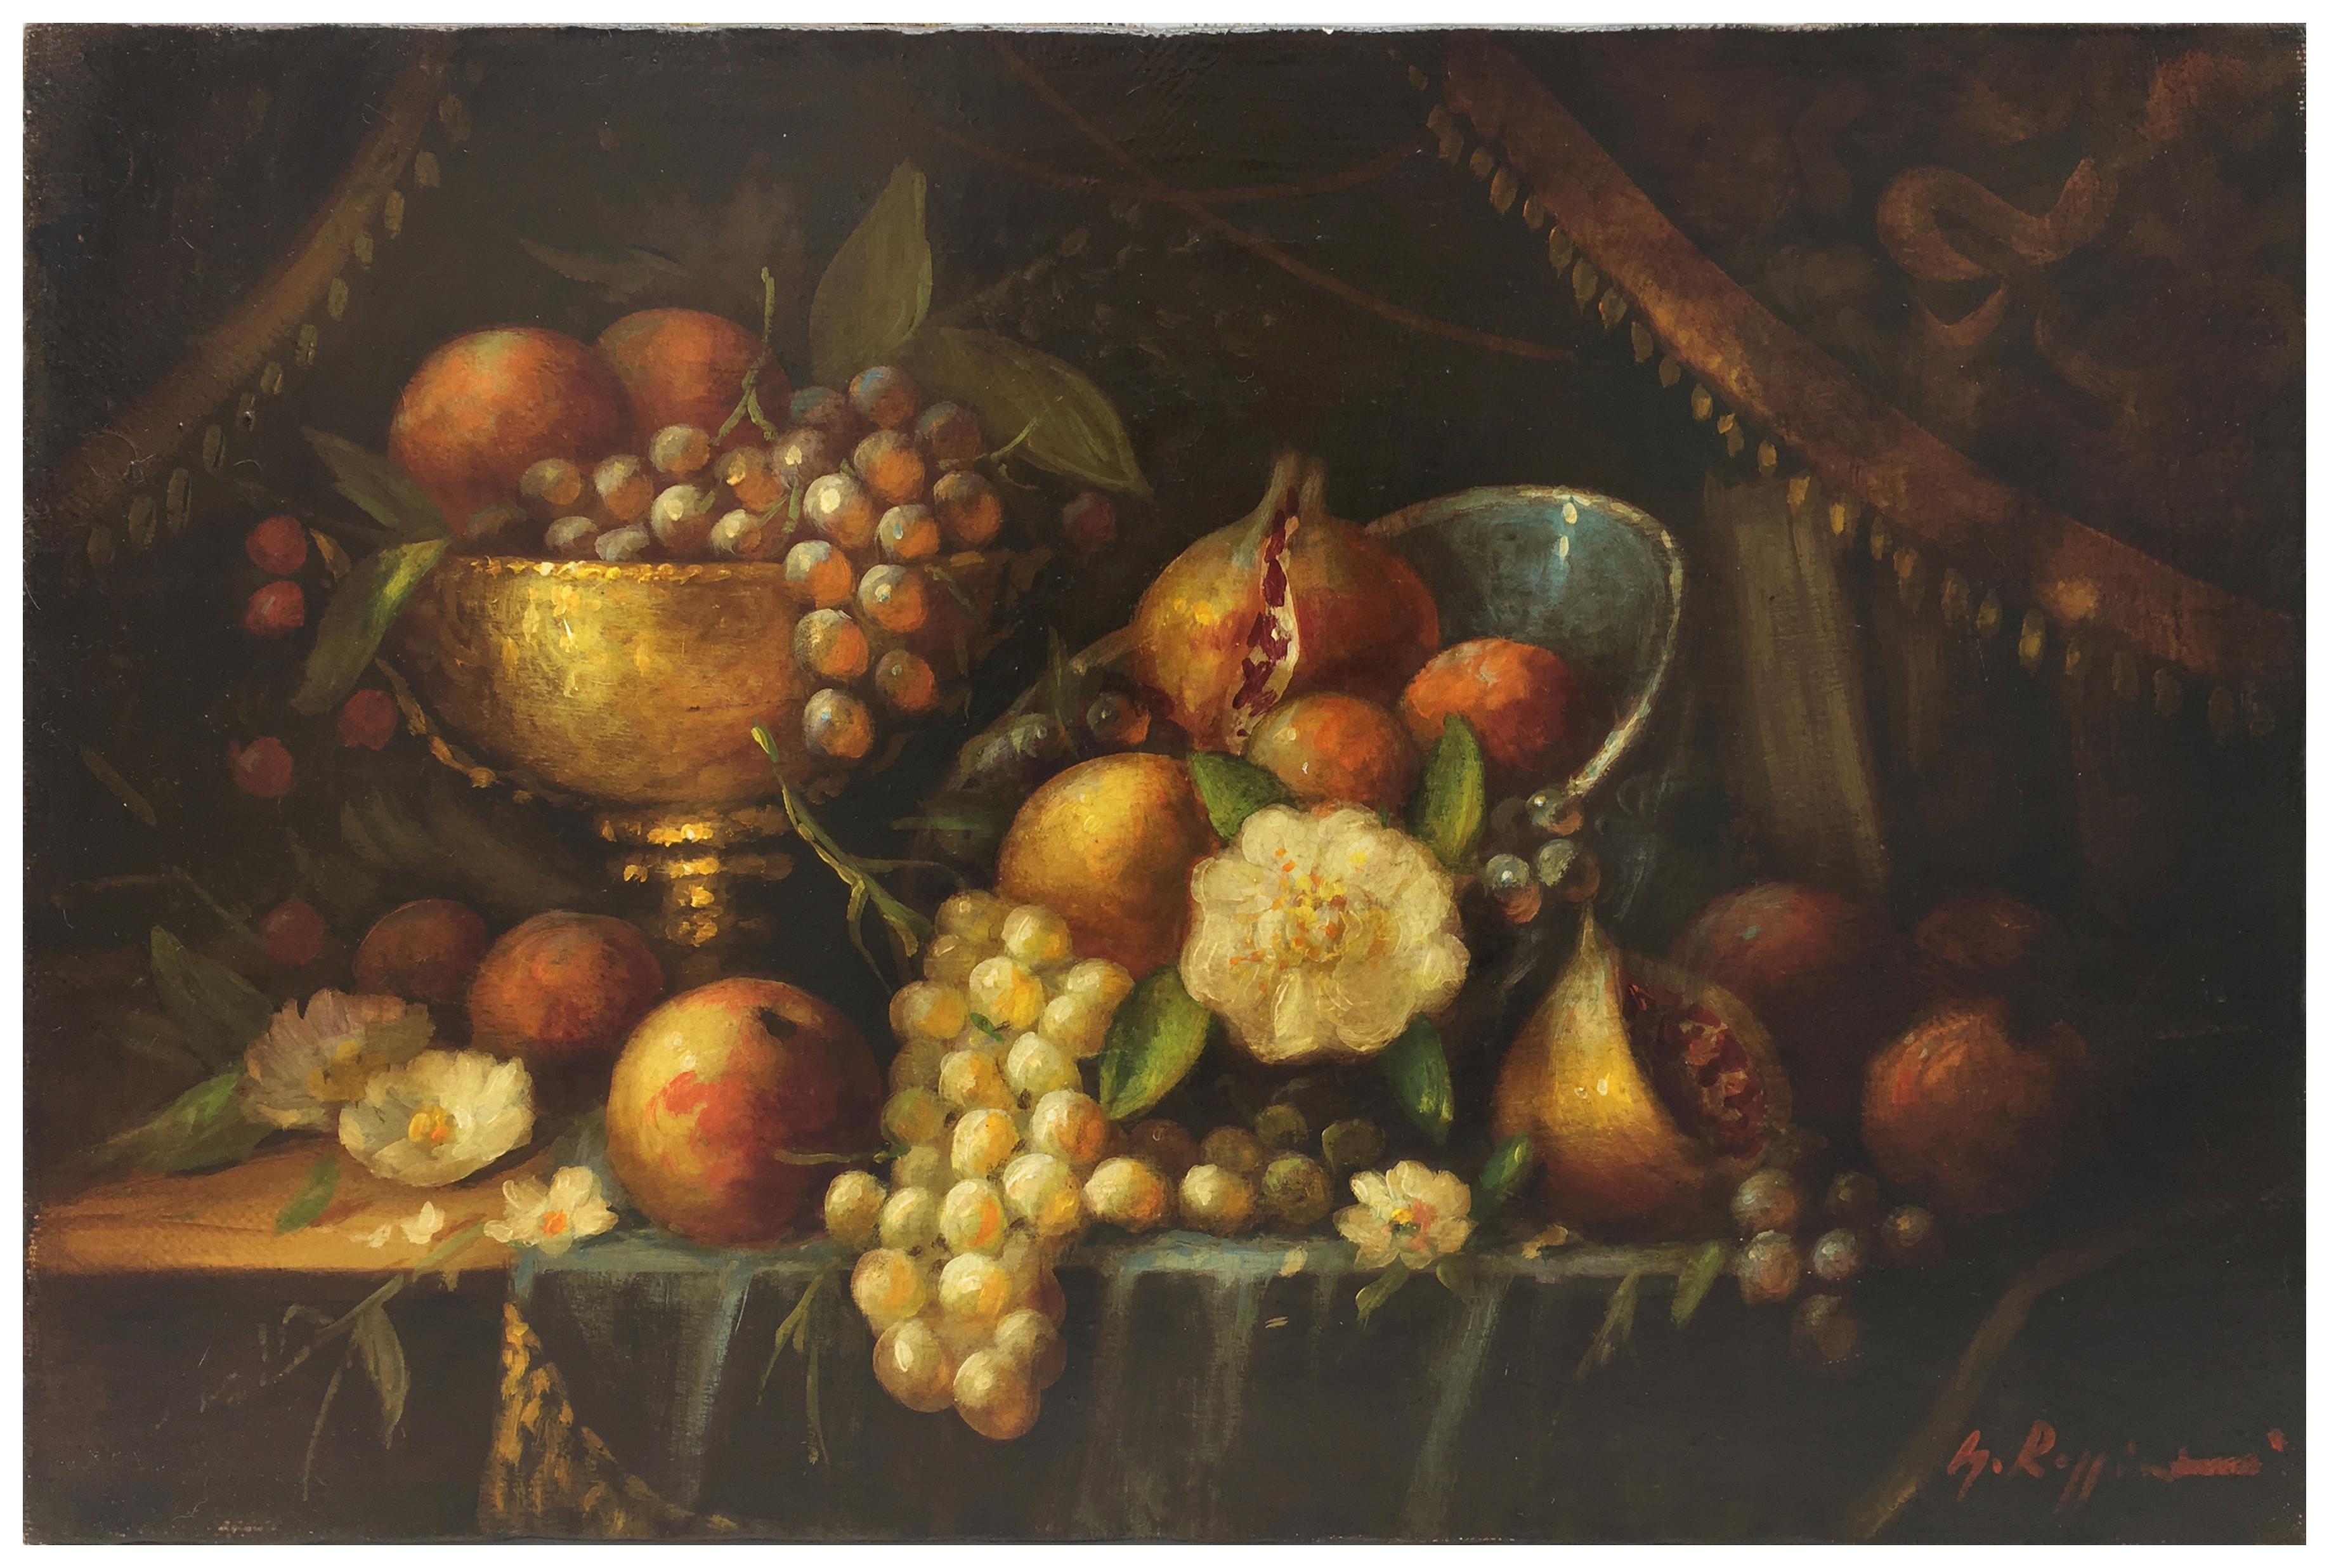 Still life - Massimo Reggiani Italia 2007 - Oil on canvas cm. 40x60
The origins of still life are found in Dutch painting, among other sources. At the beginning of Dutch painting, artists included additional elements in their religious compositions,